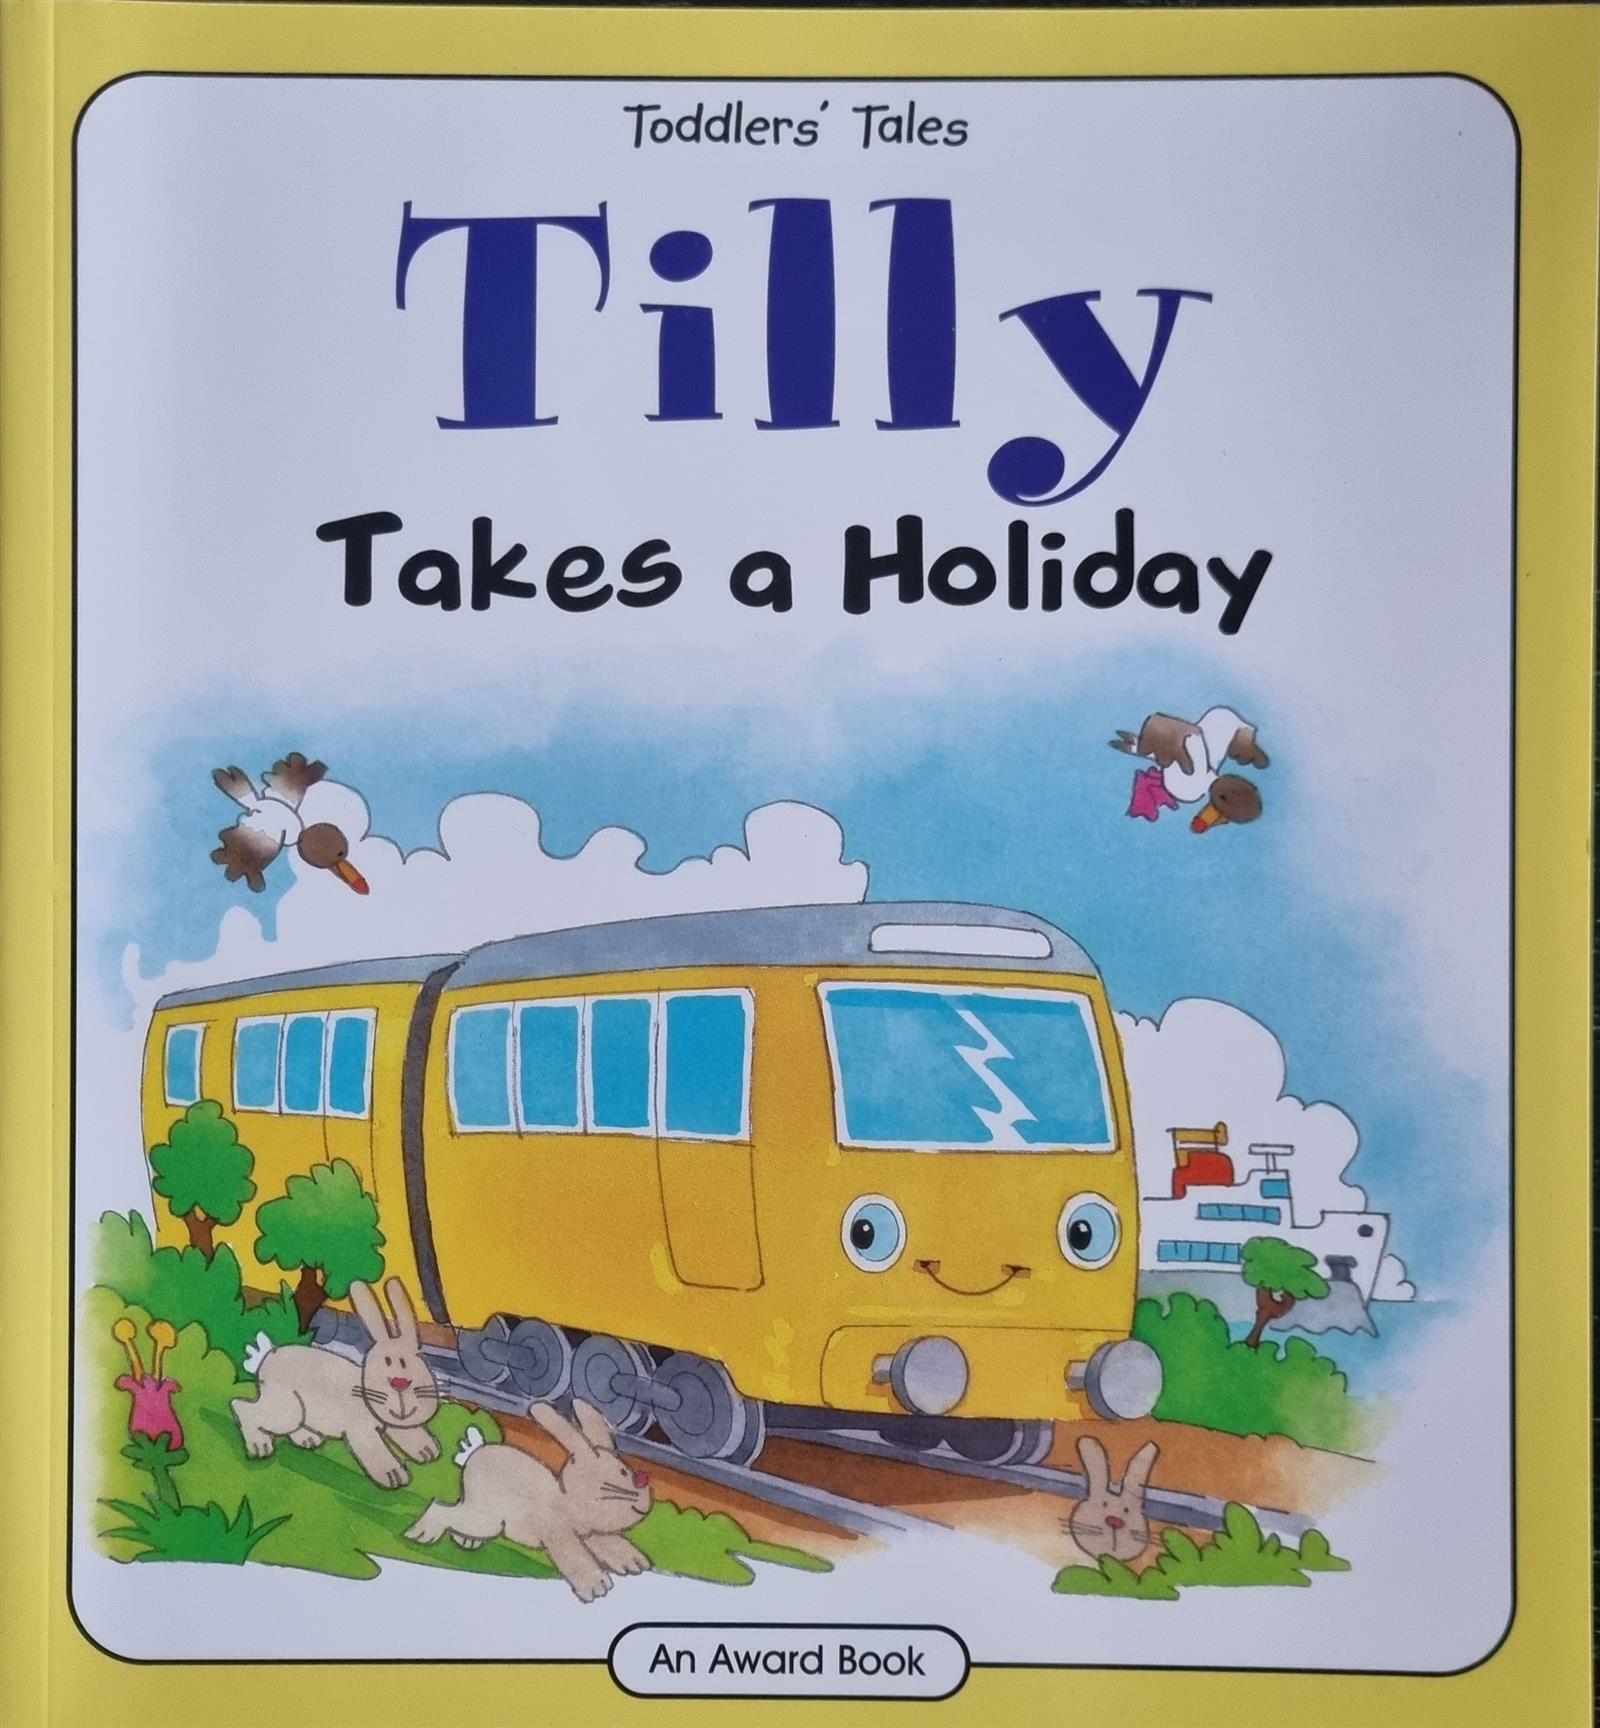 (Toddlers' Tales)Tilly: The Takes a holiday